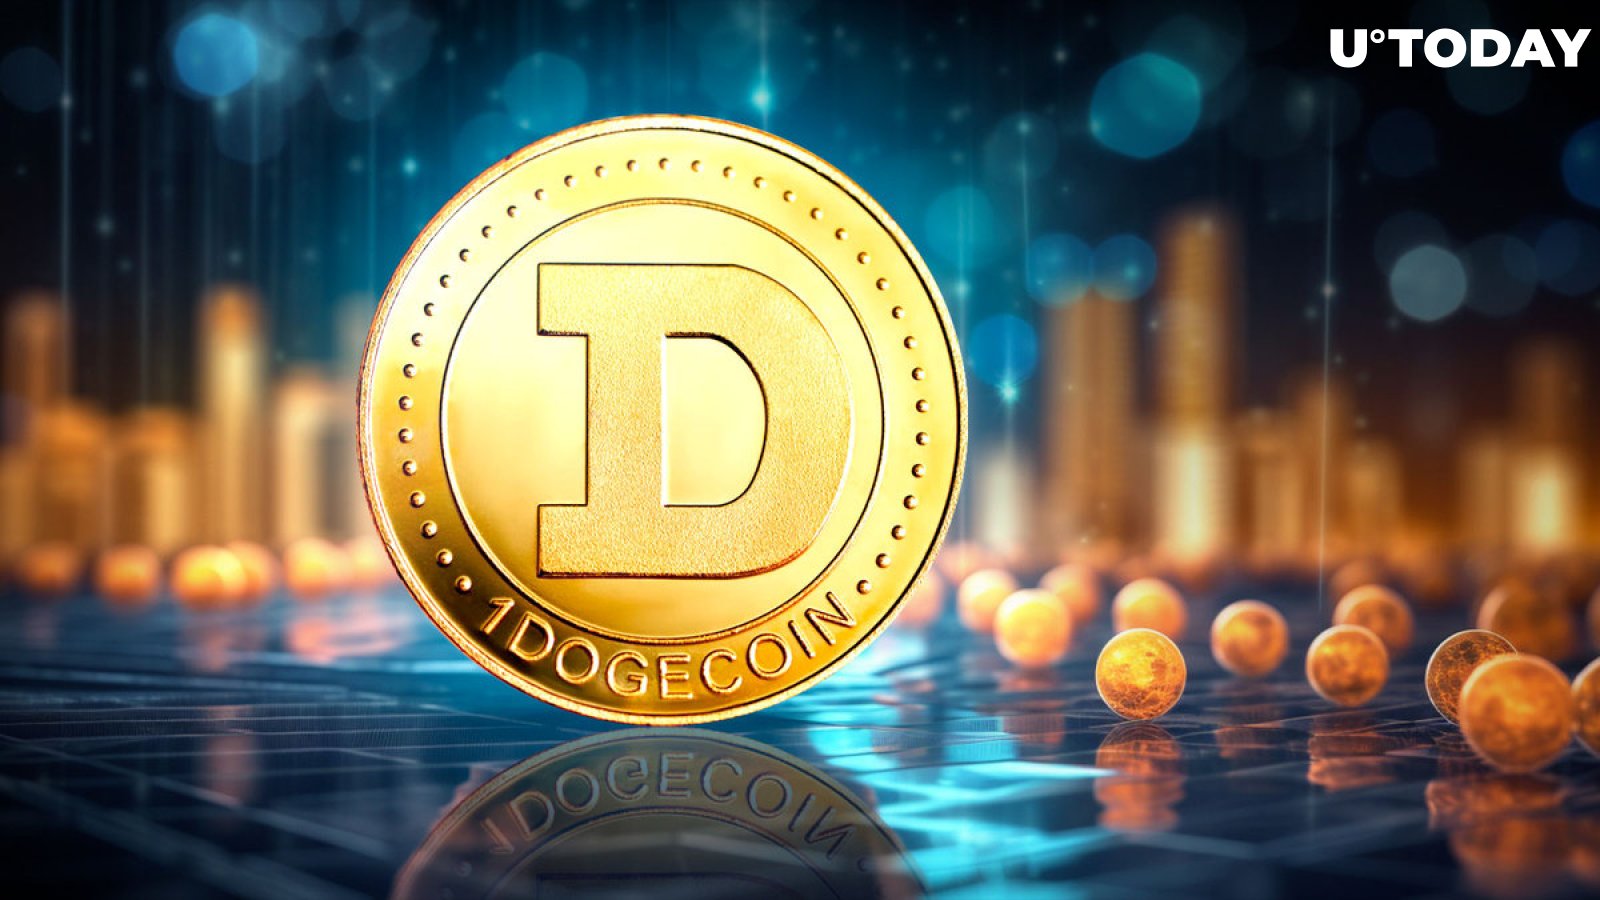 Dogecoin (DOGE) Joins XRP, SOL USDC Futures on This Major Exchange: Details